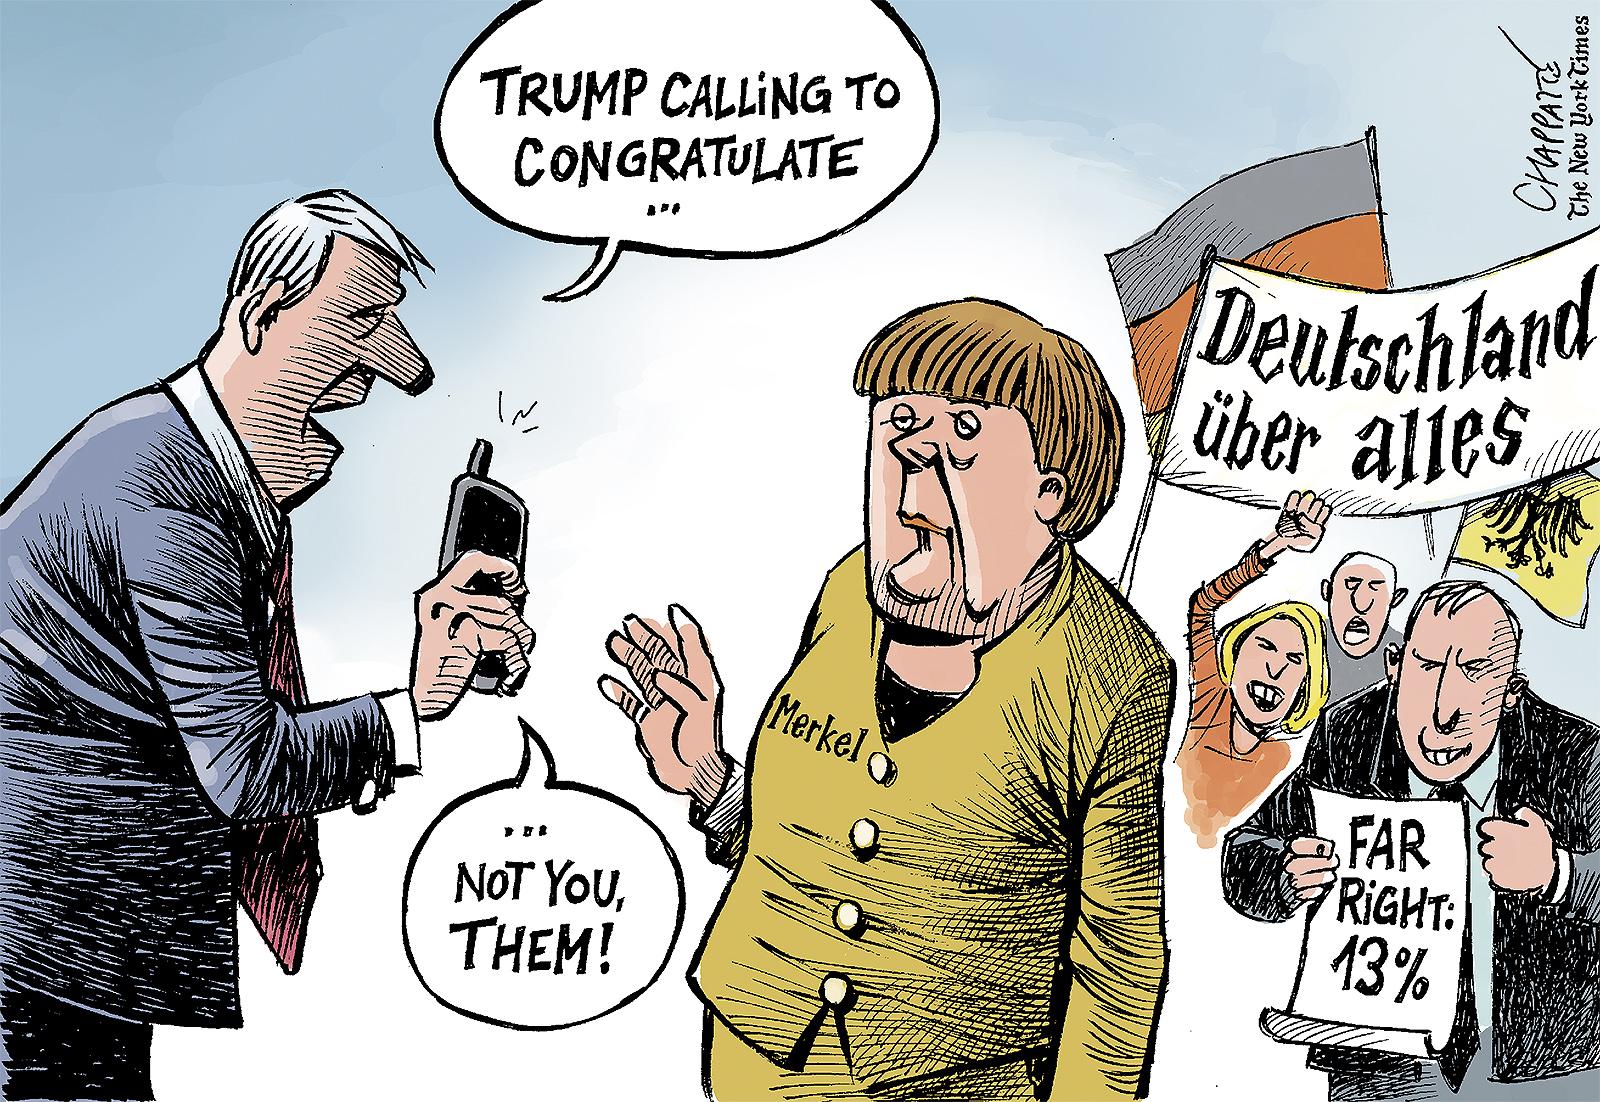 After the German elections